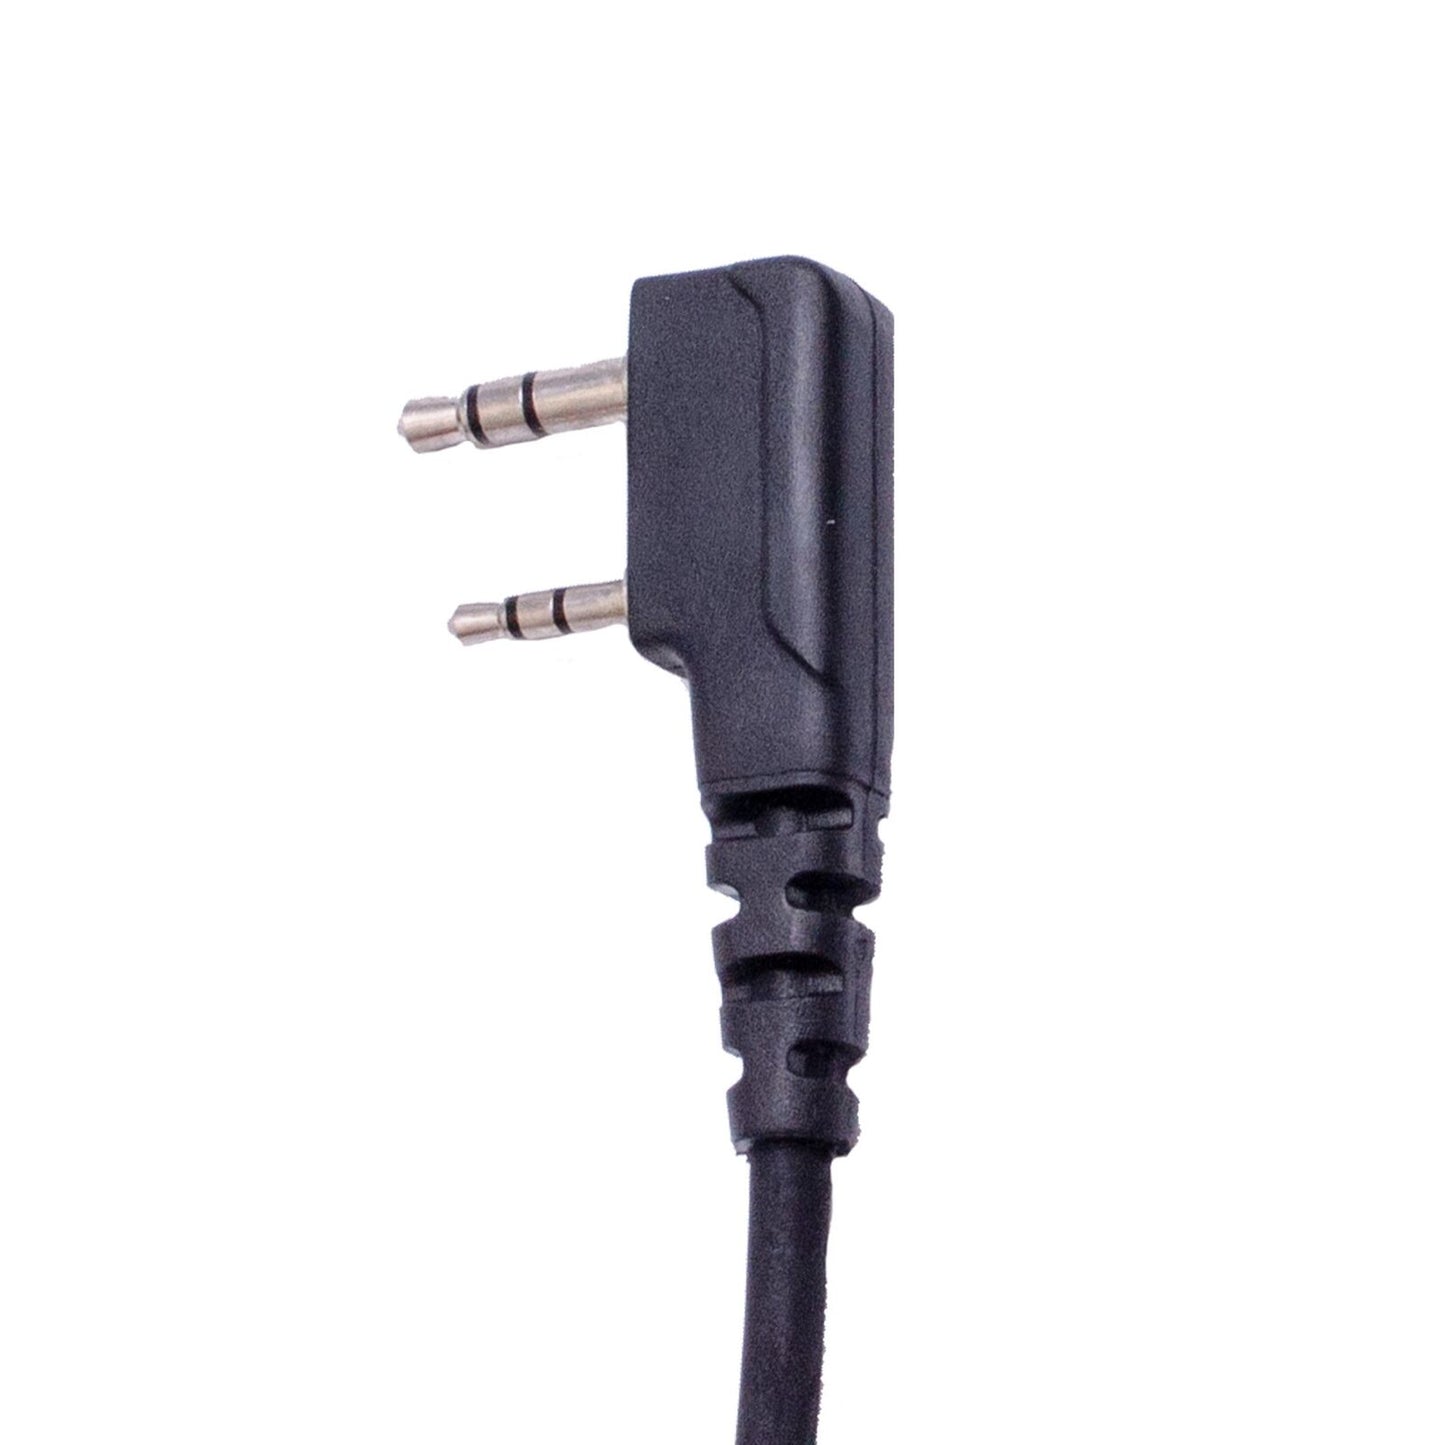 USB Programming Cable for Kenwood Portable Radios - KPG-22 Compatible